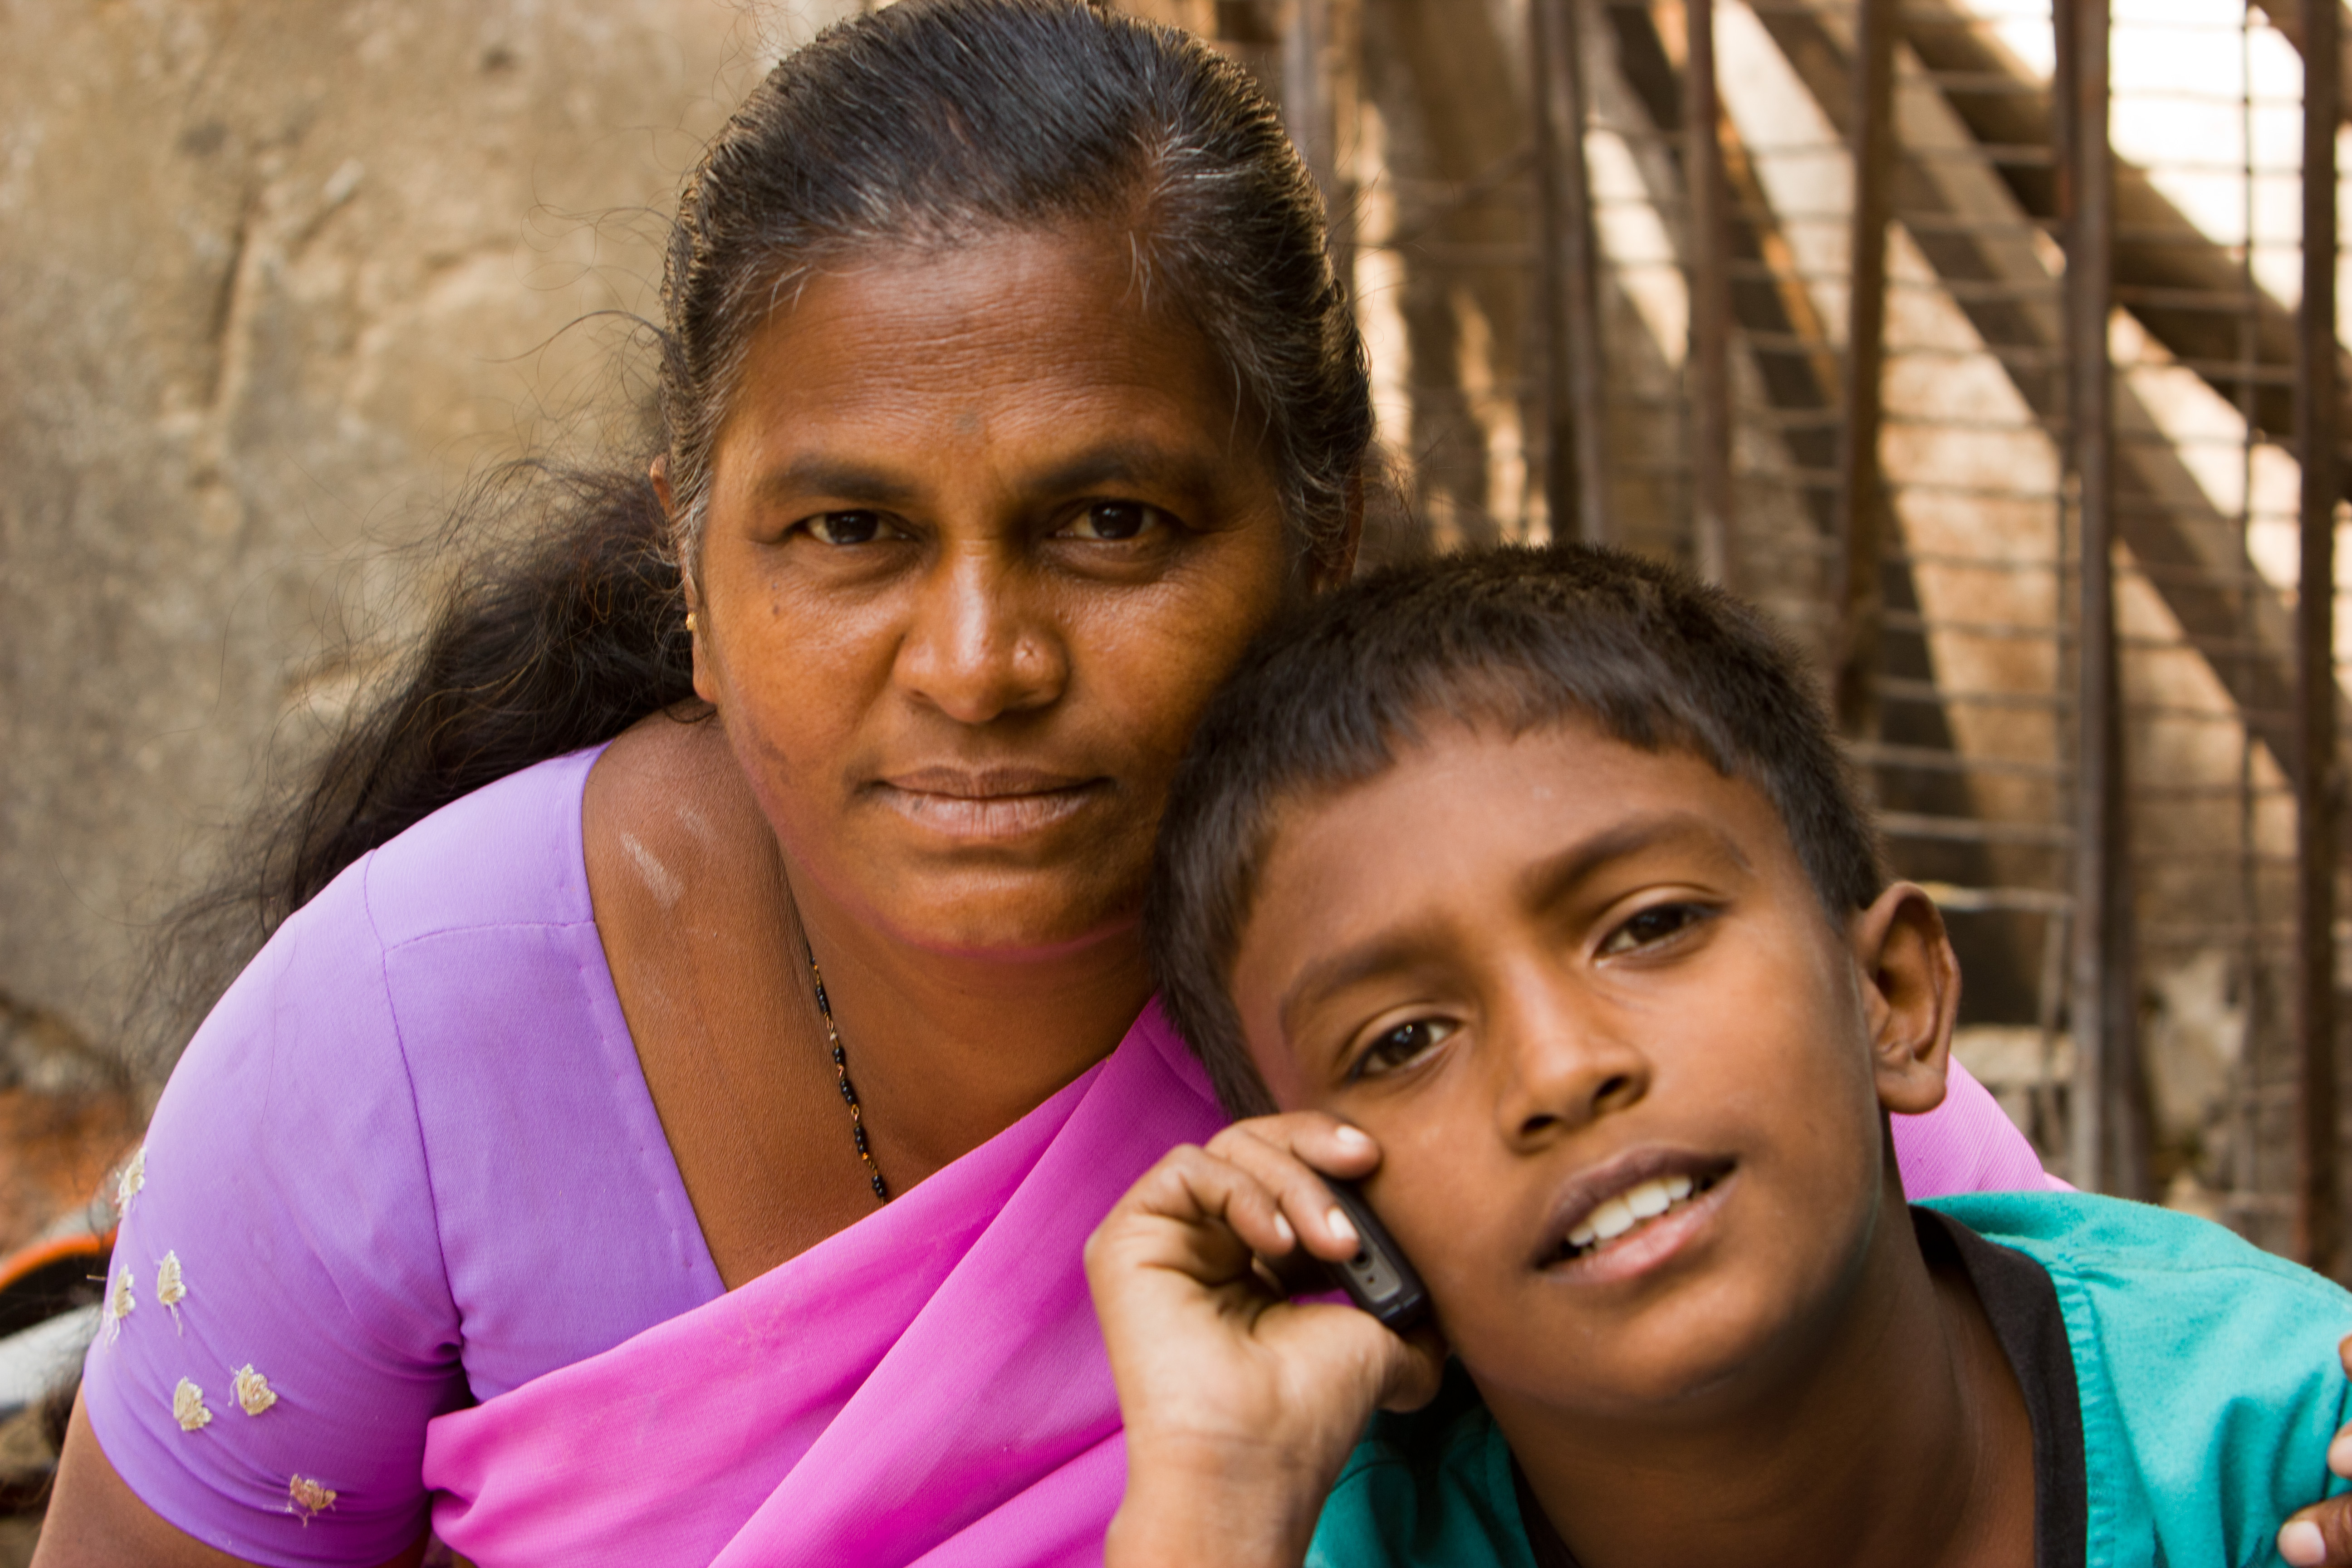 FileBangalore mom and son on cellphone November 2011 -14-2.jpg ... picture